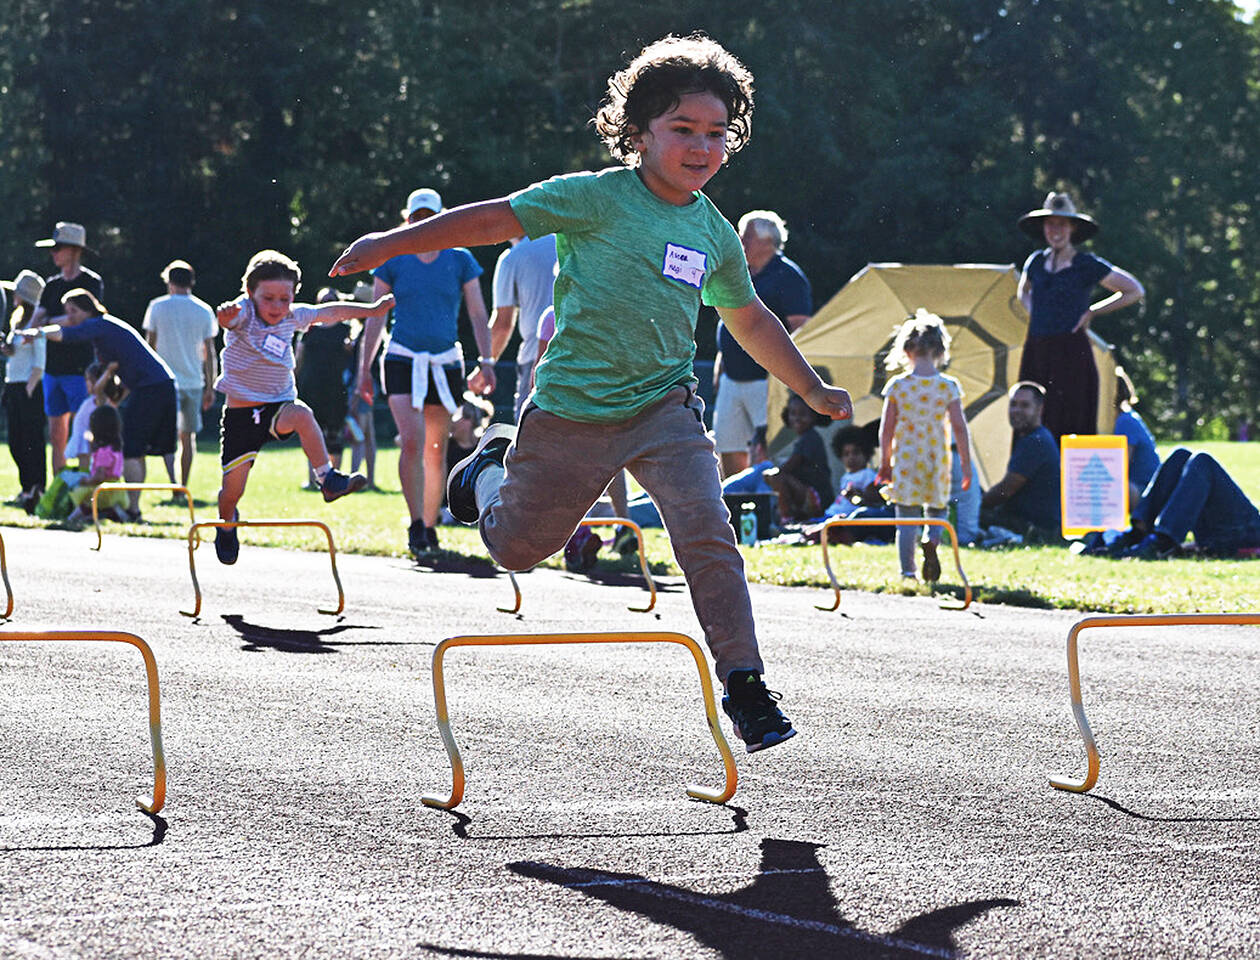 The kids compete by jumping over cute little hurdles.